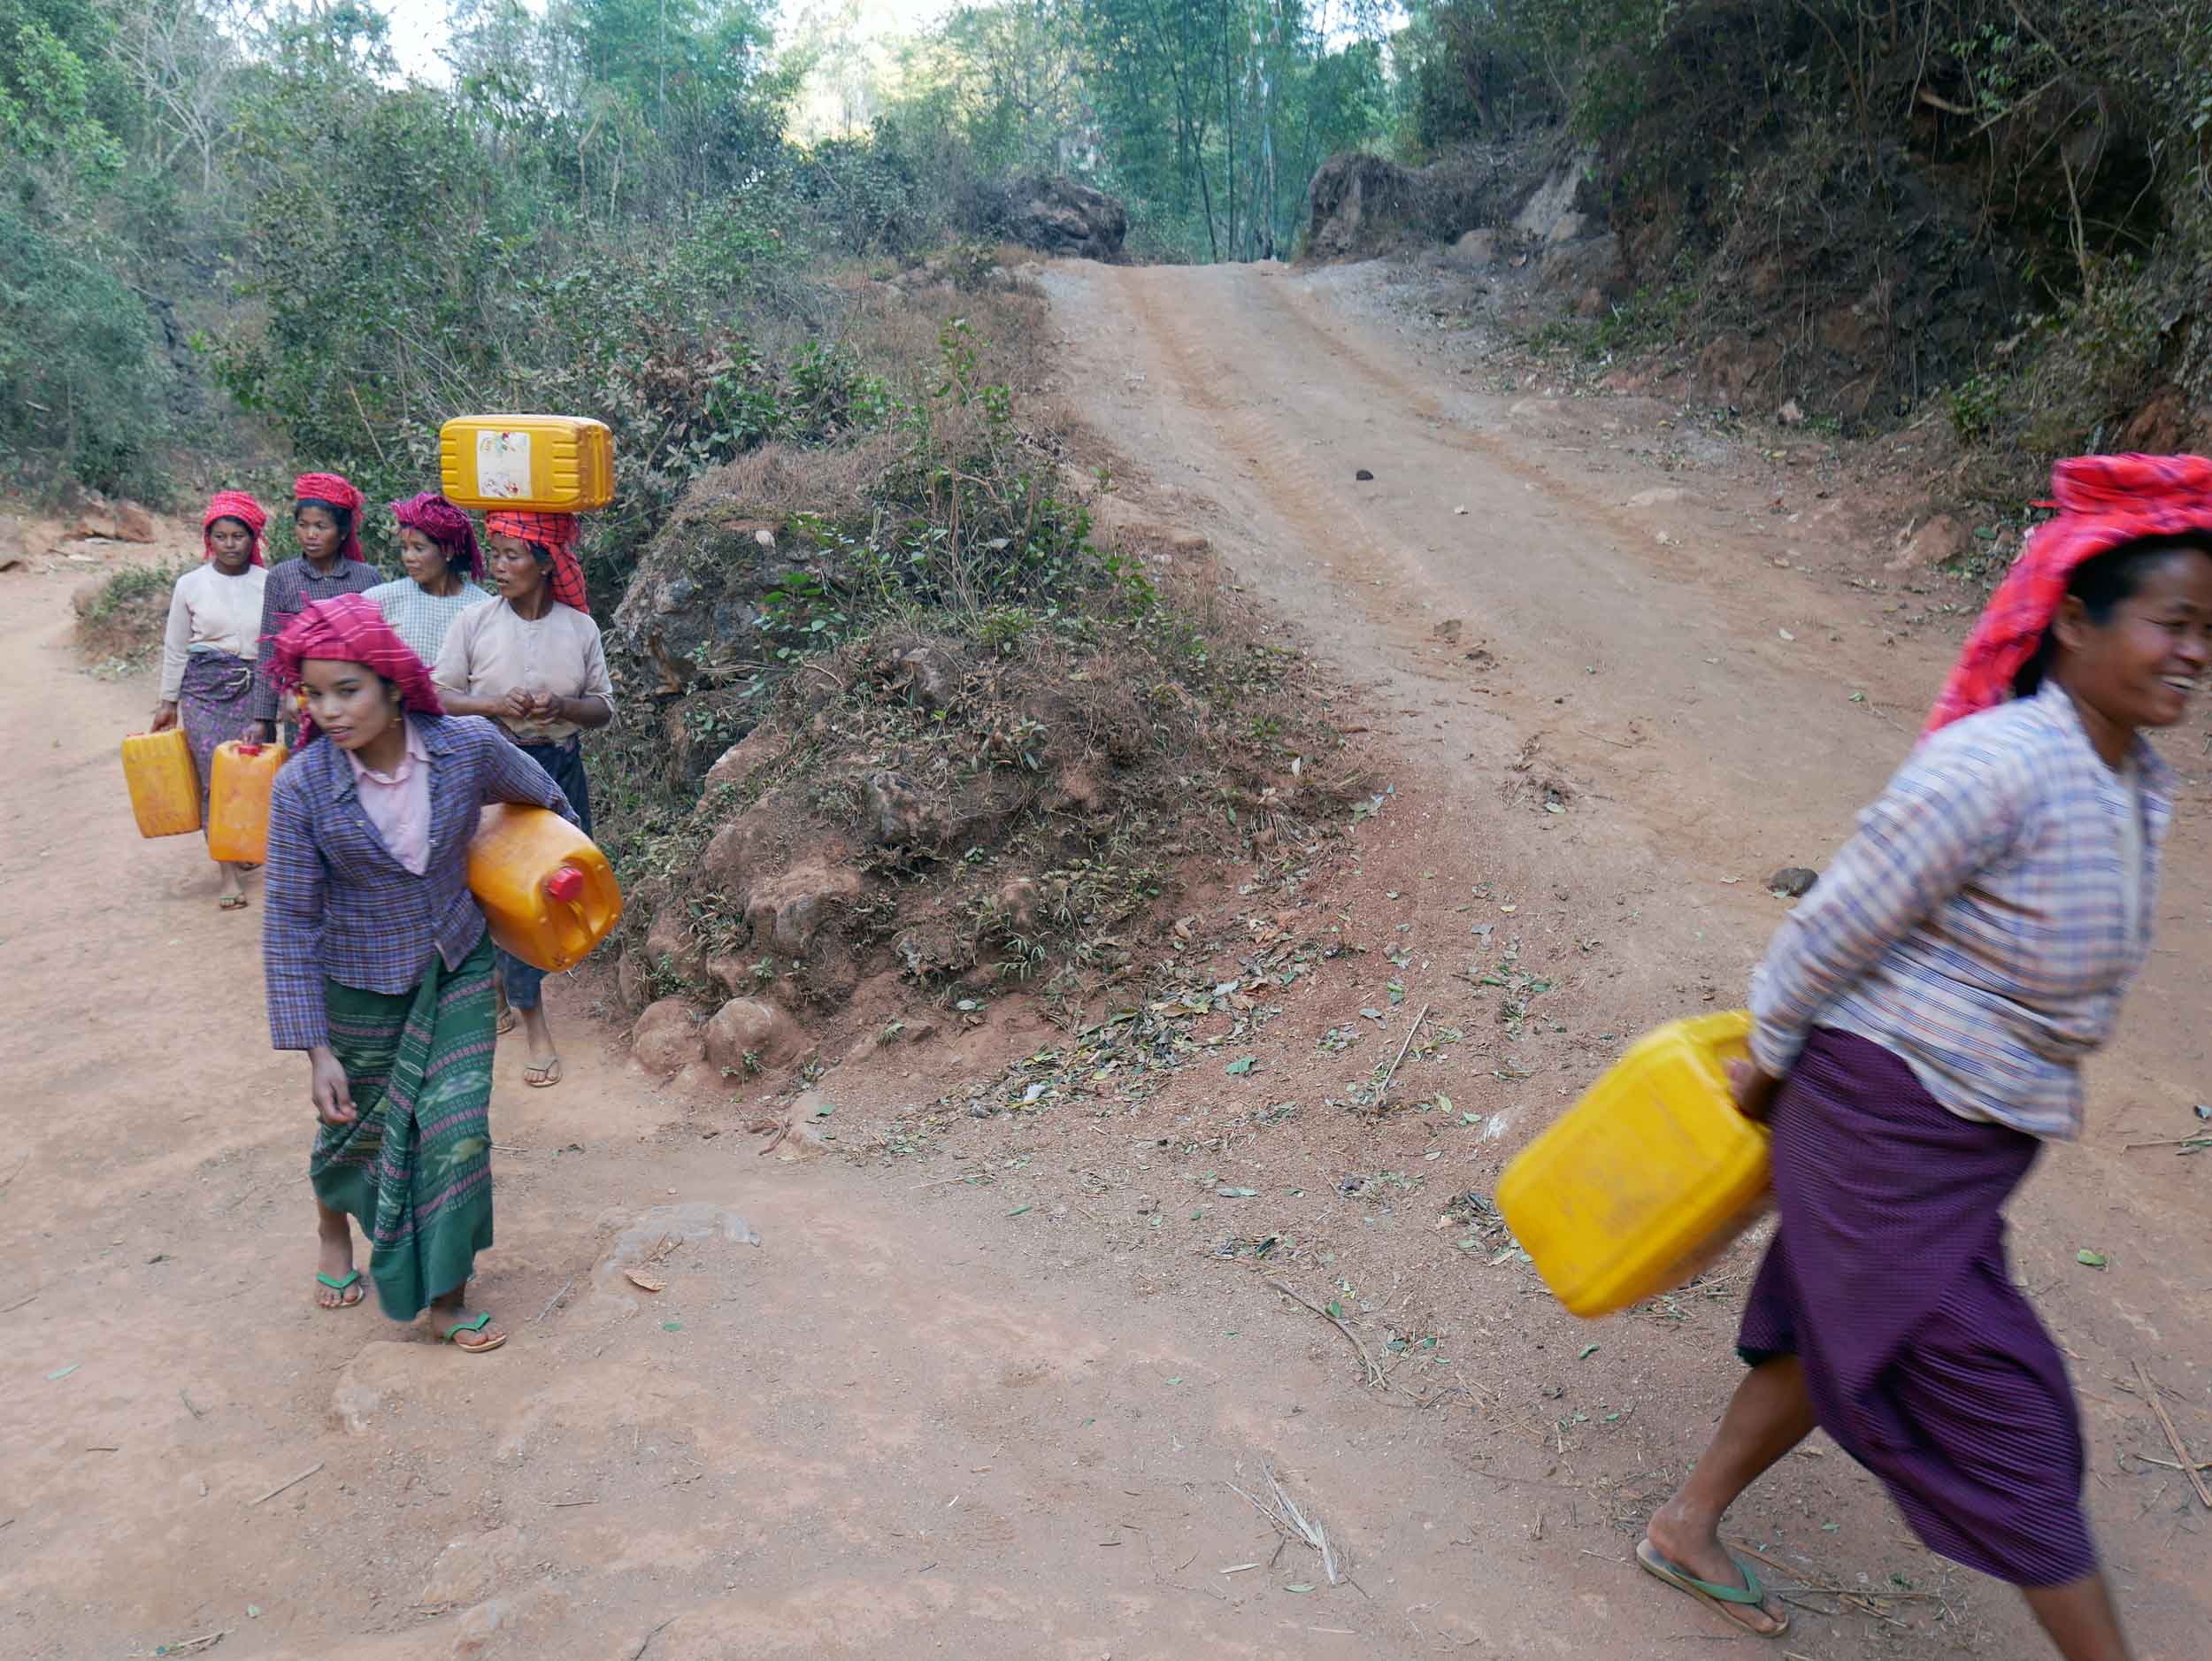  As we neared Pattu Pauk village, where we would spend the night, we passed local women walking to the well to collect water (Feb 20).&nbsp; 